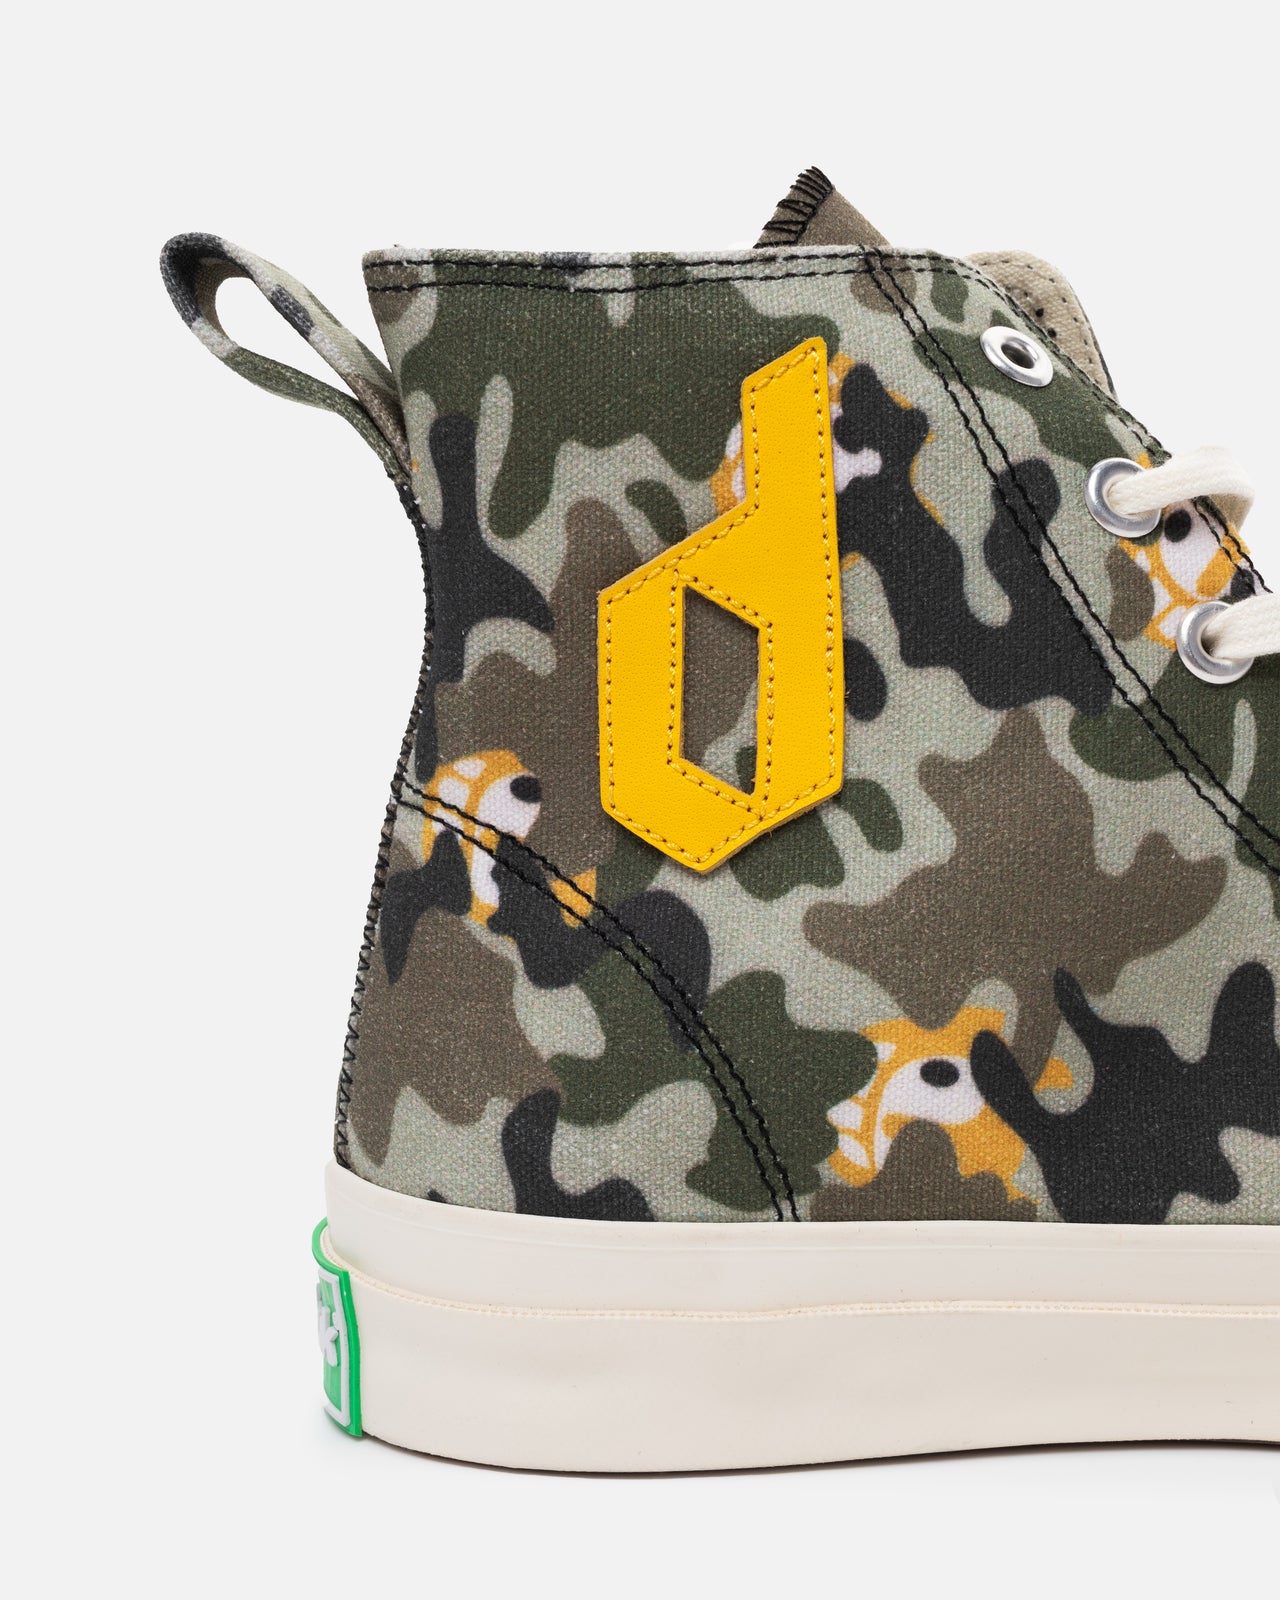 LUCKY ONE "LIL DYBBUK CAMO" (GREEN/YELLOW)